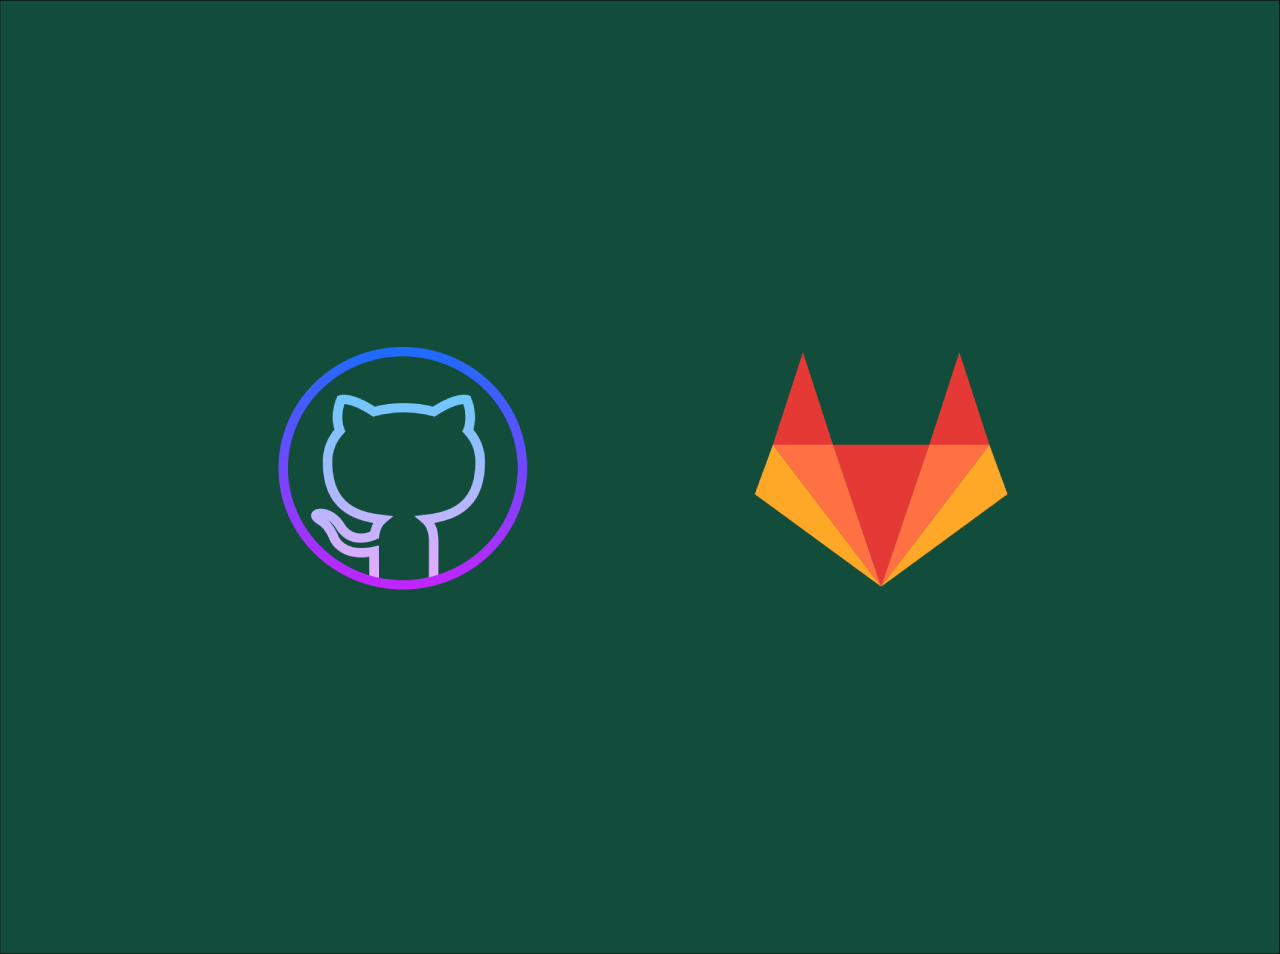 How to use GitLab CICD with GitHub Repository